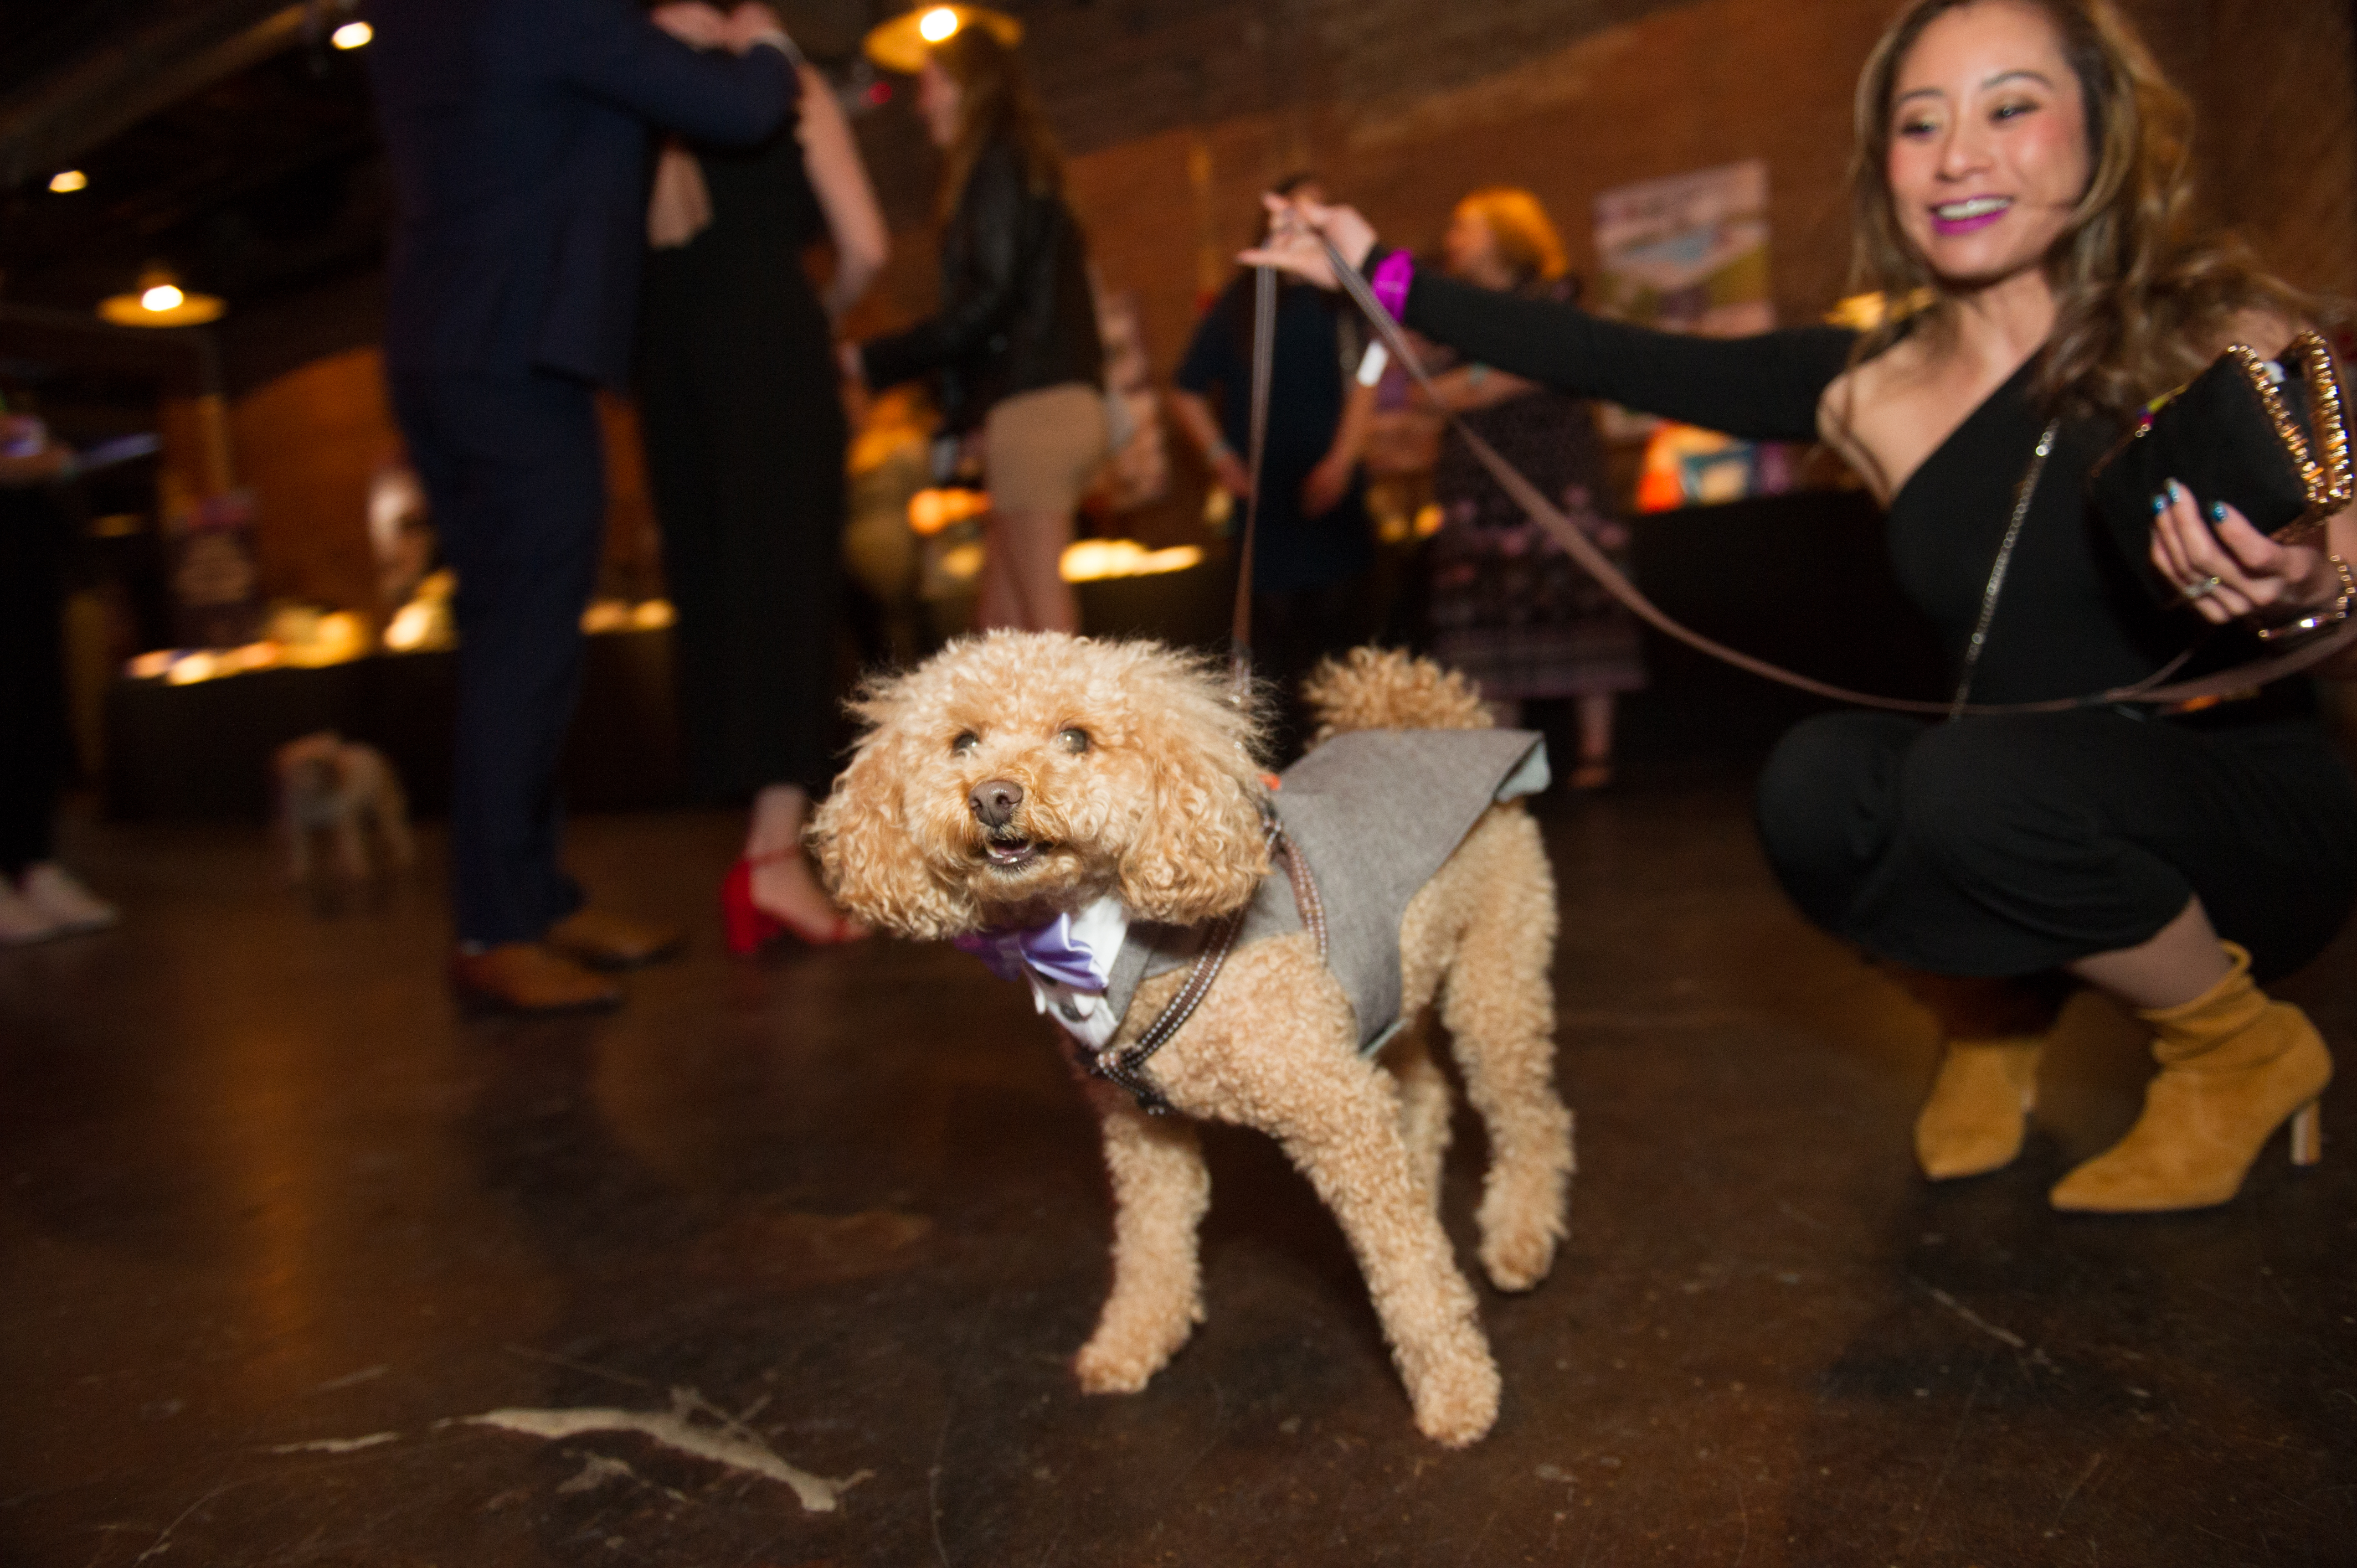 Toby_dog_hits_the_dance_floor_owner_Cecilia_Lee_Photo_by_Sparenga_Photography.jpg